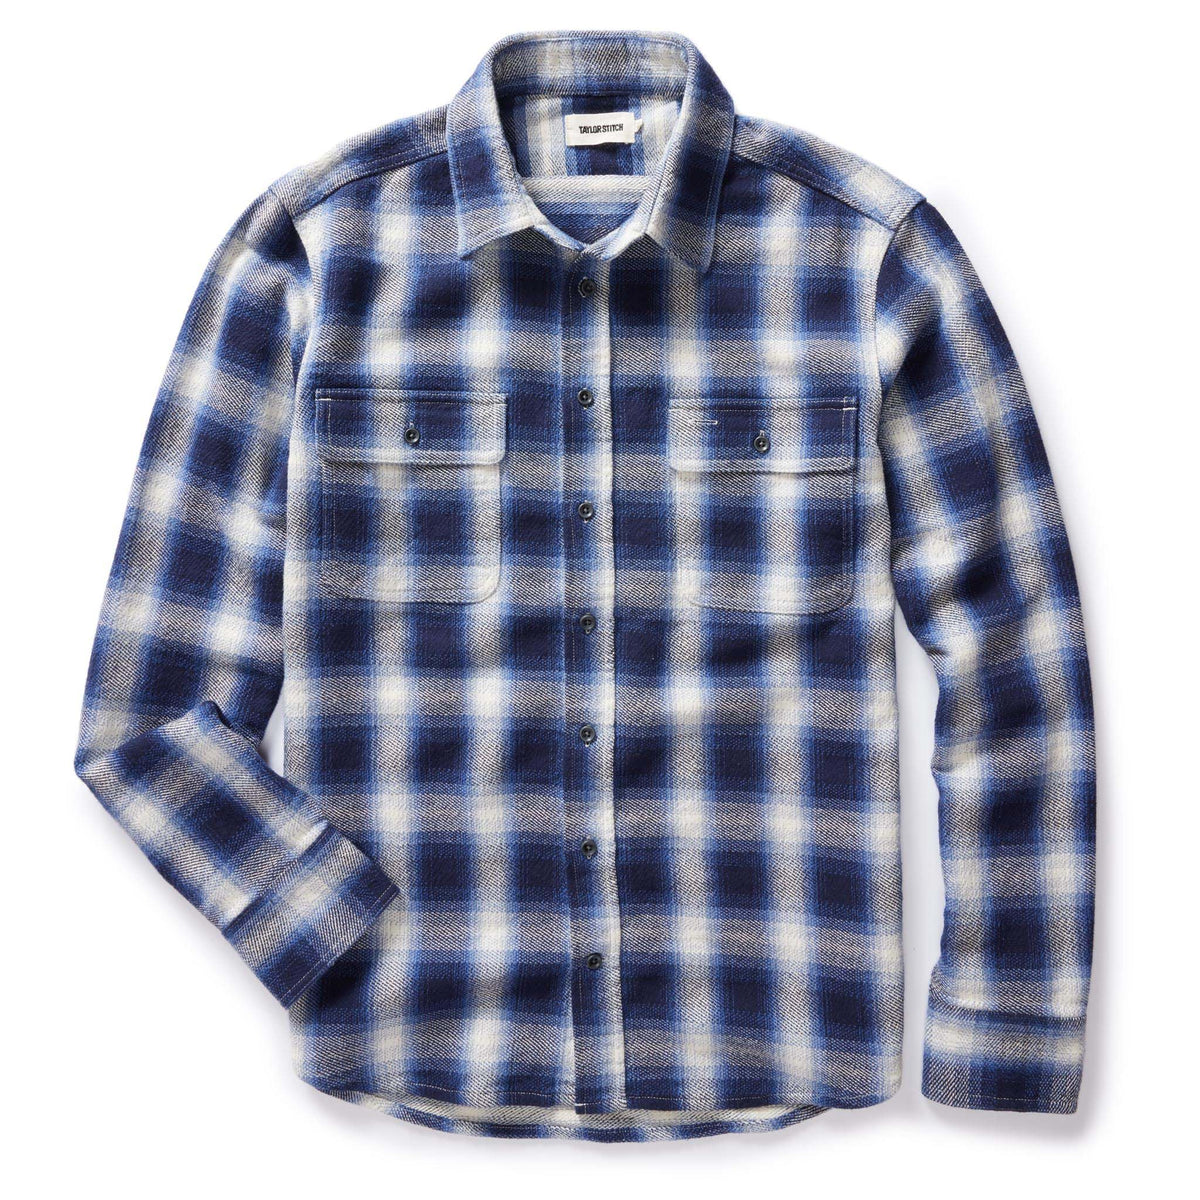 The Ledge Mens Flannel Shirt in Blue Sky Plaid | Taylor Stitch